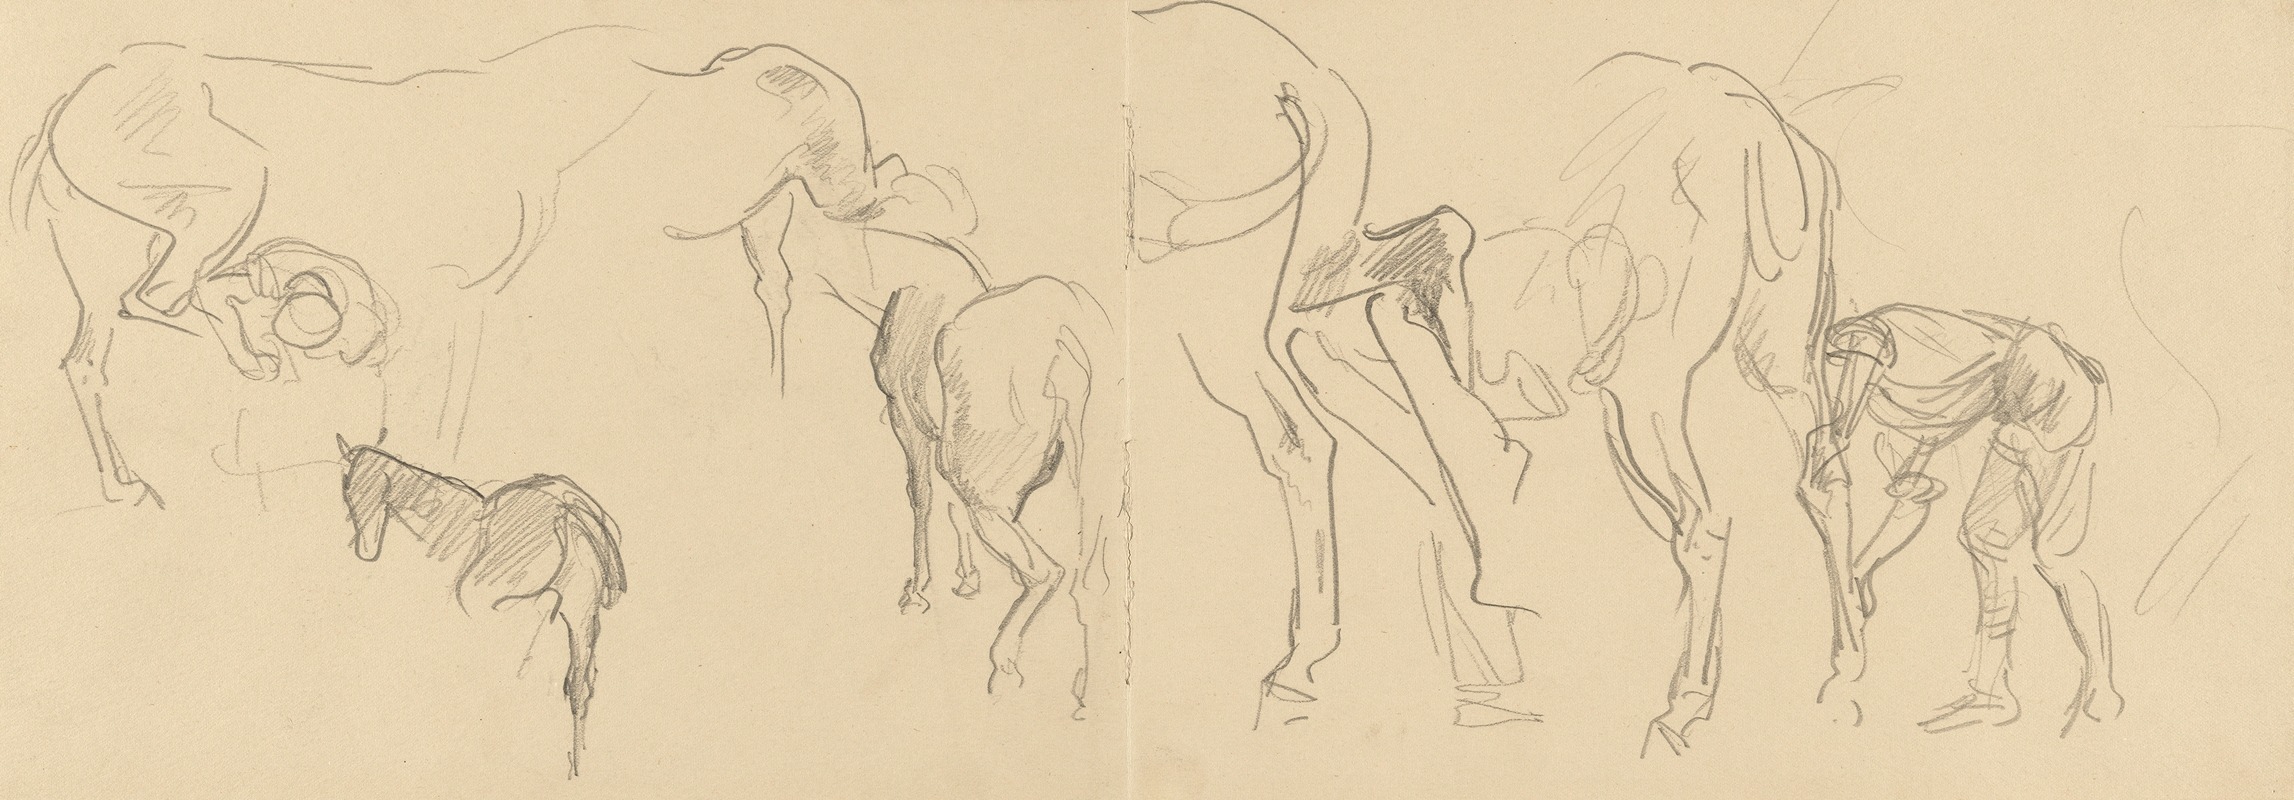 John Singer Sargent - Studies for ‘Shoeing Calvary Horses at the Front’ (recto)